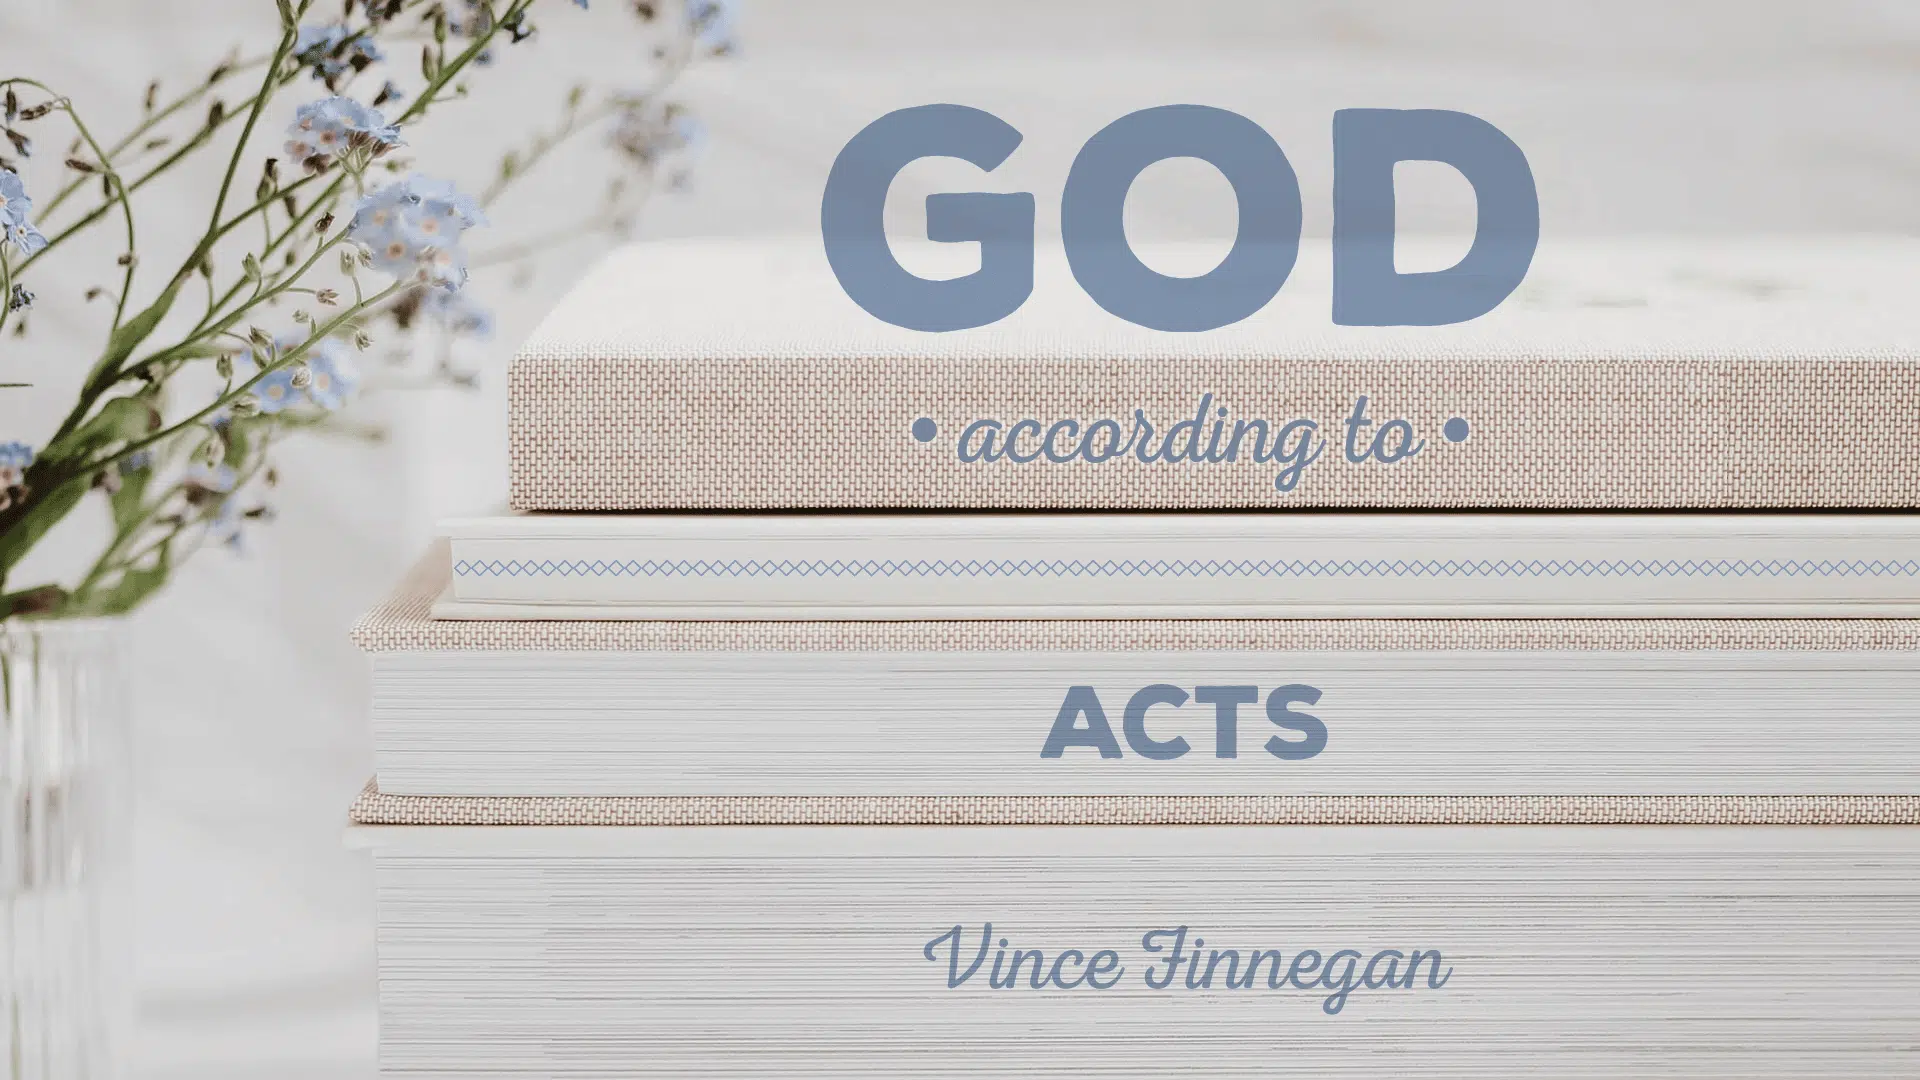 God According to Acts